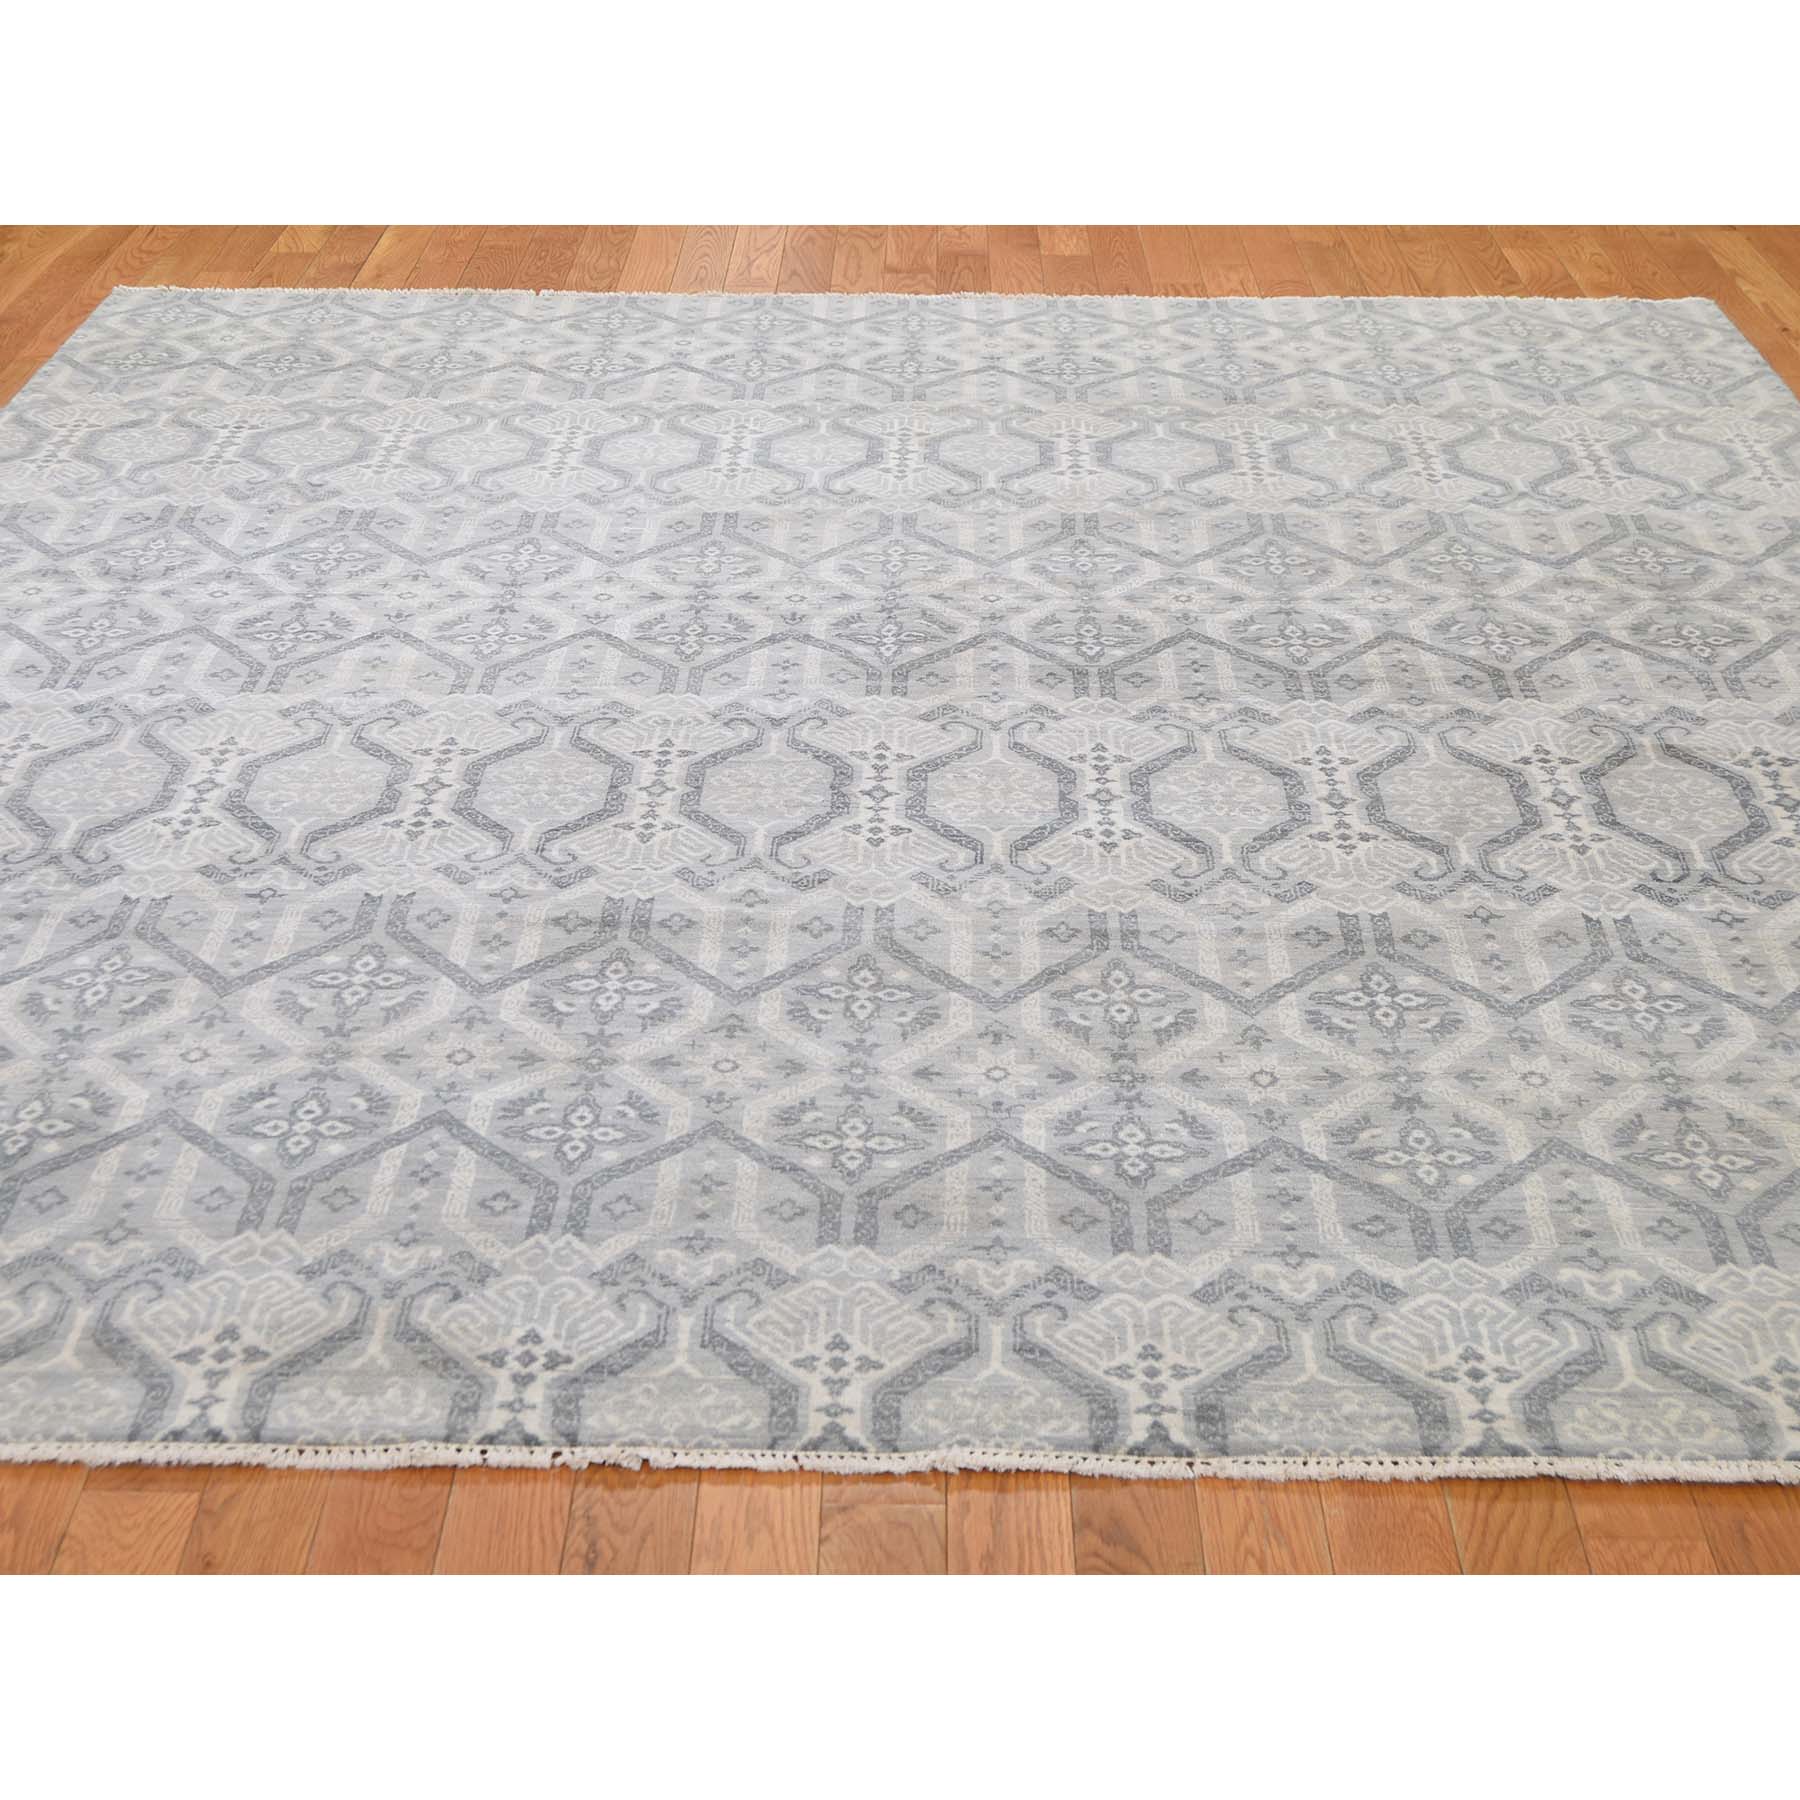 8-1 x9-3  Ikat Silver Wash Tribal Design Pure Wool Hand-Knotted Oriental Rug 